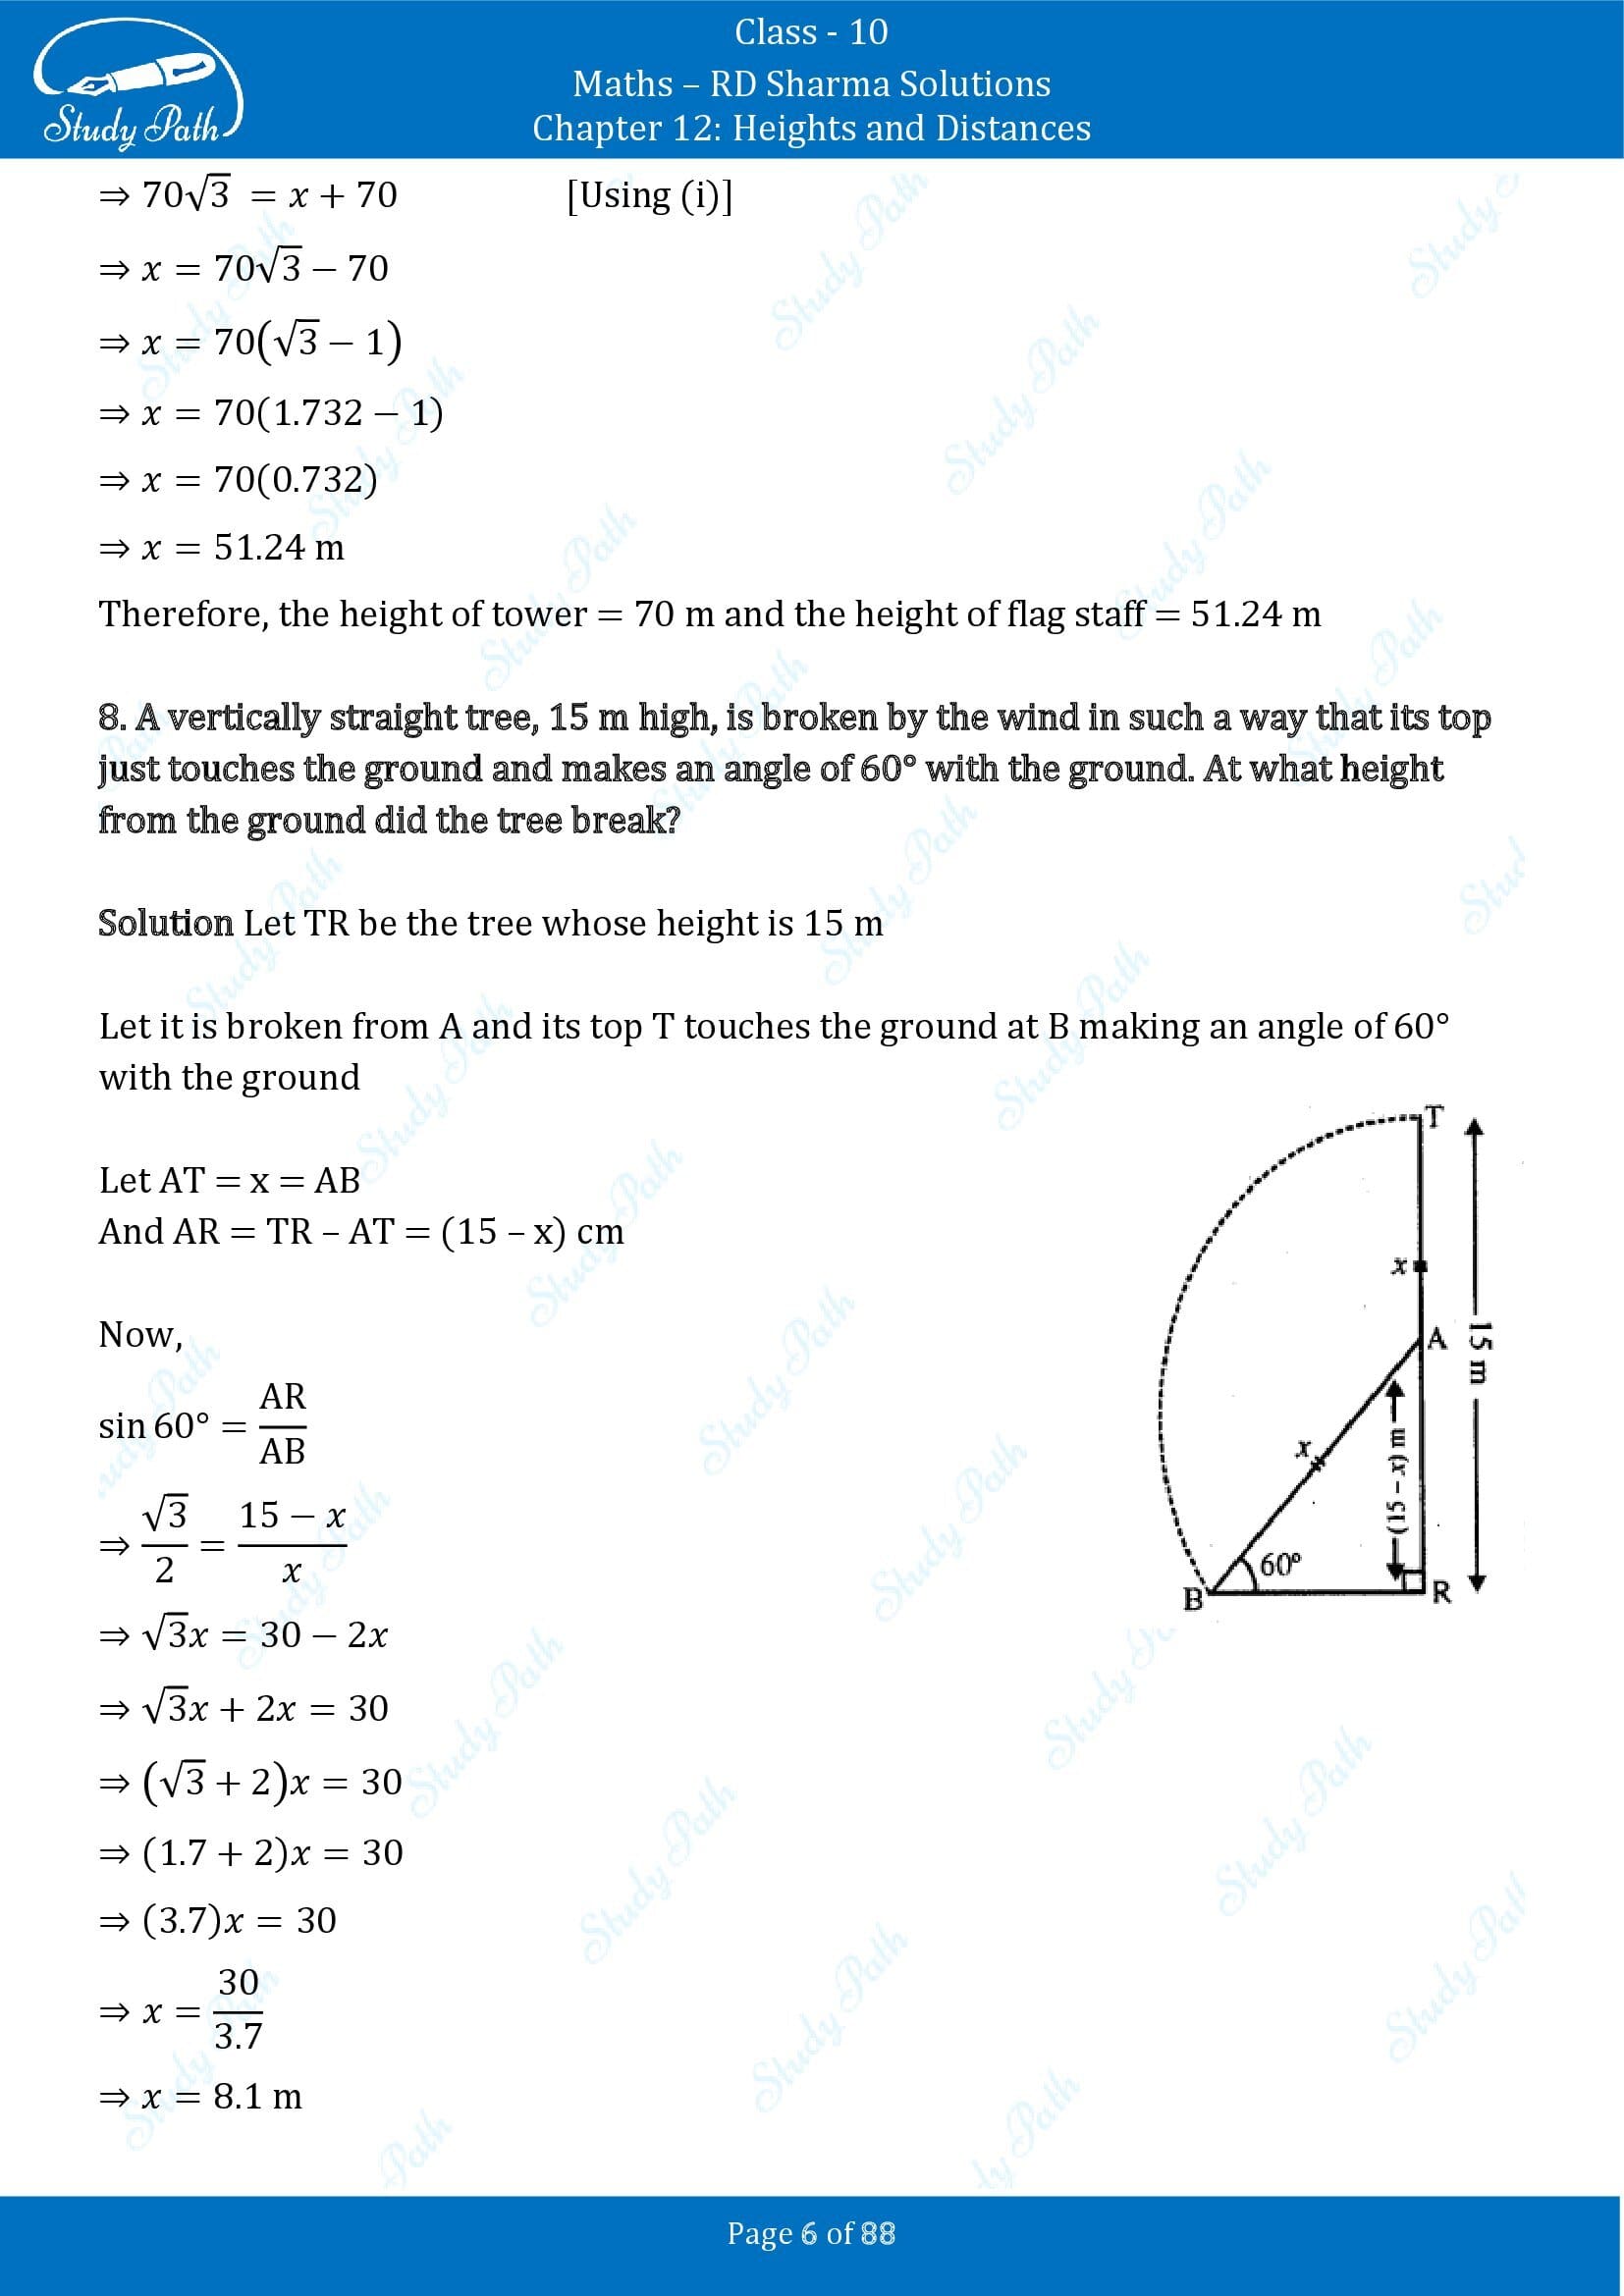 RD Sharma Solutions Class 10 Chapter 12 Heights and Distances Exercise 12.1 00006